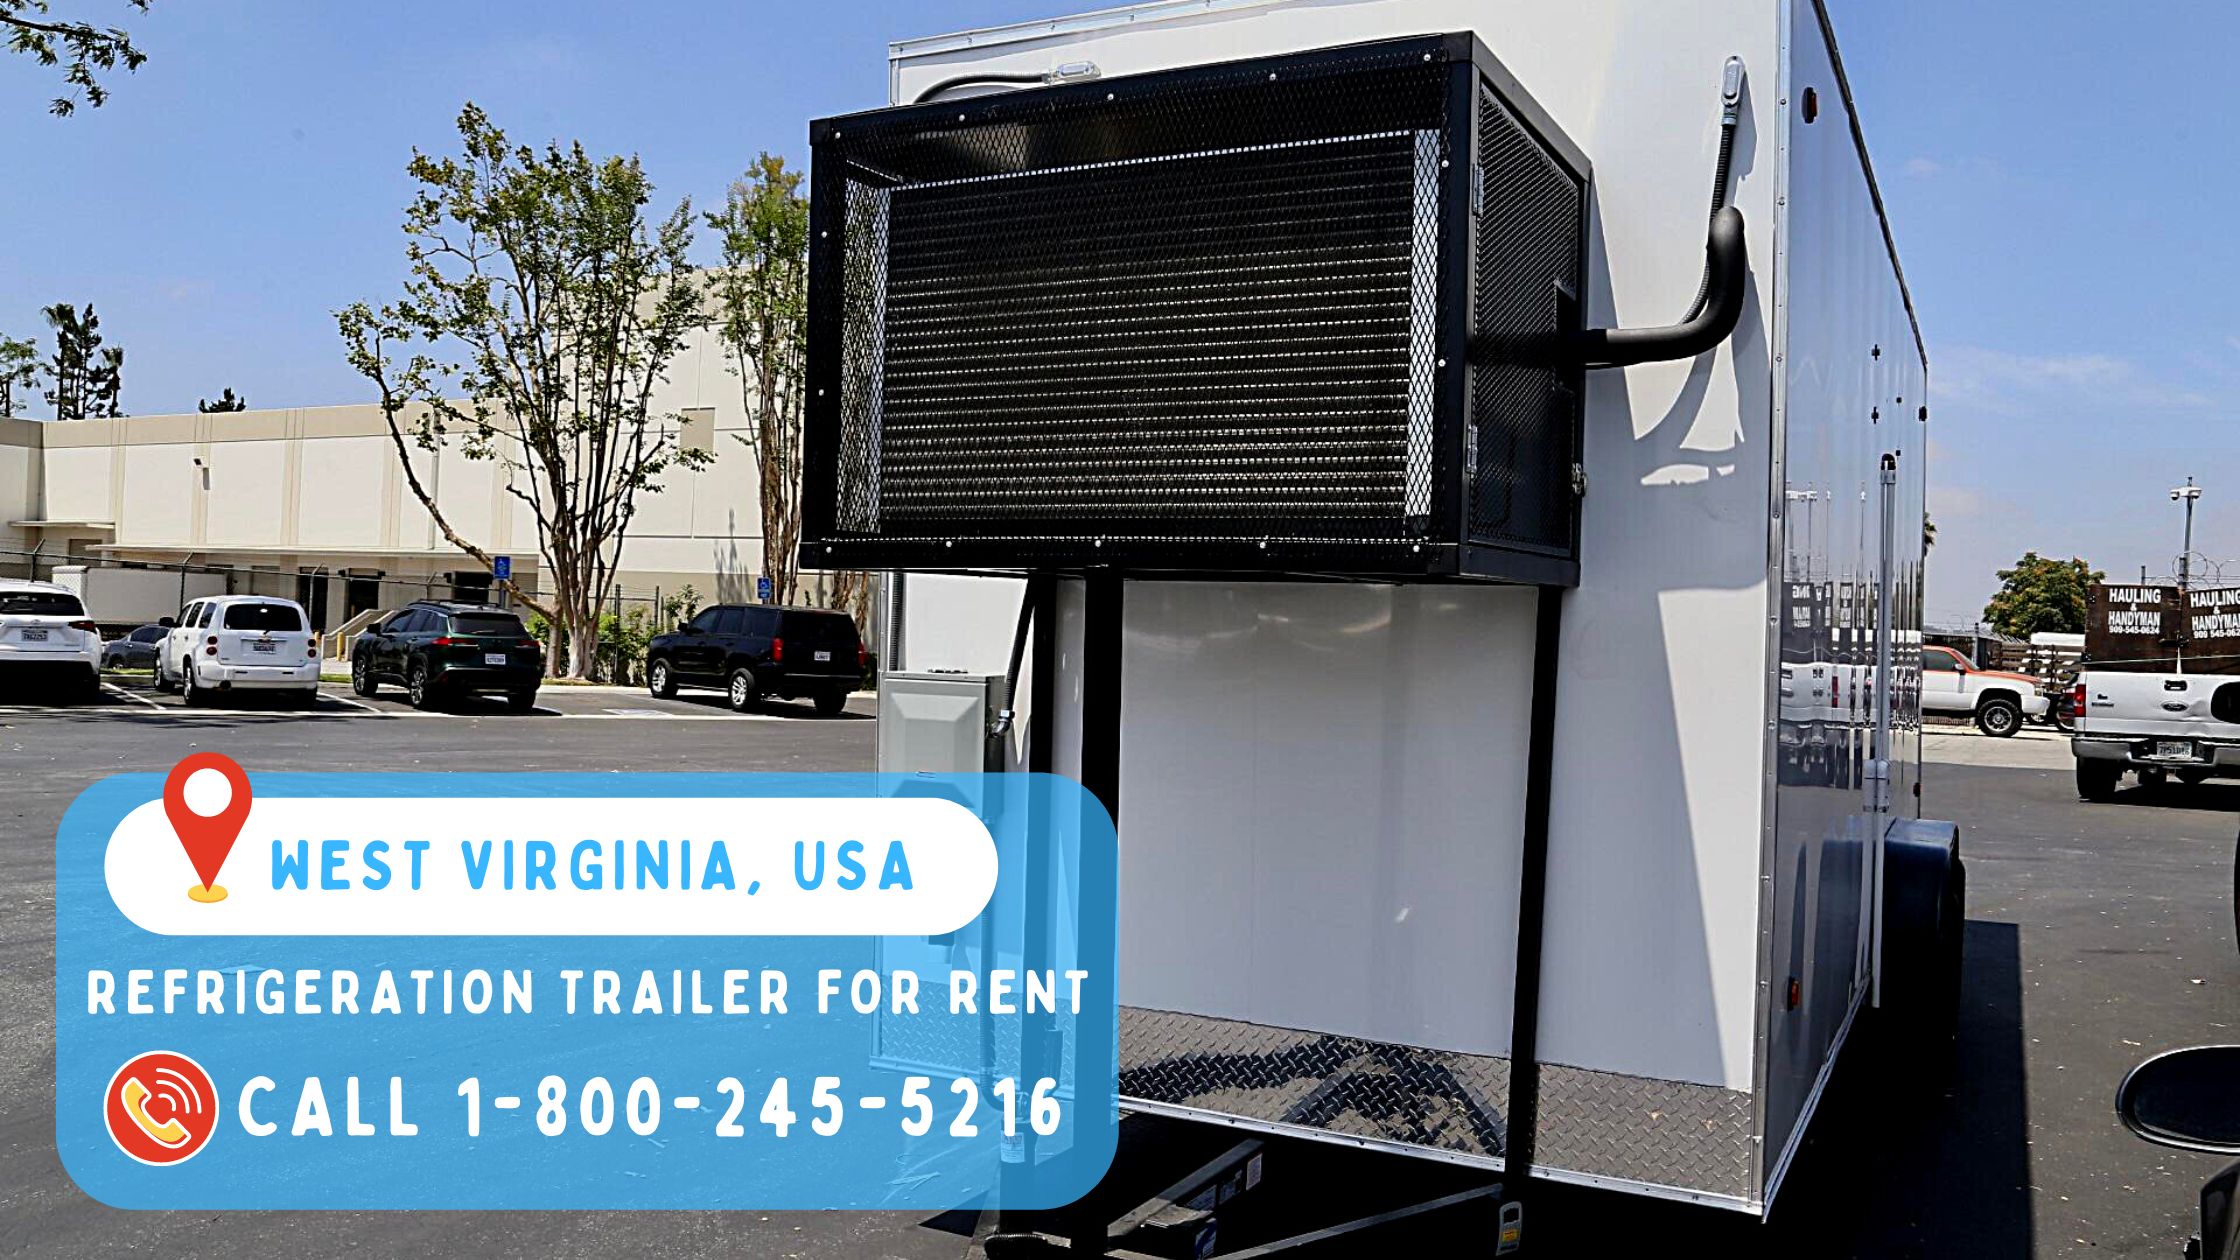 Refrigeration Trailer for Rent in West Virginia